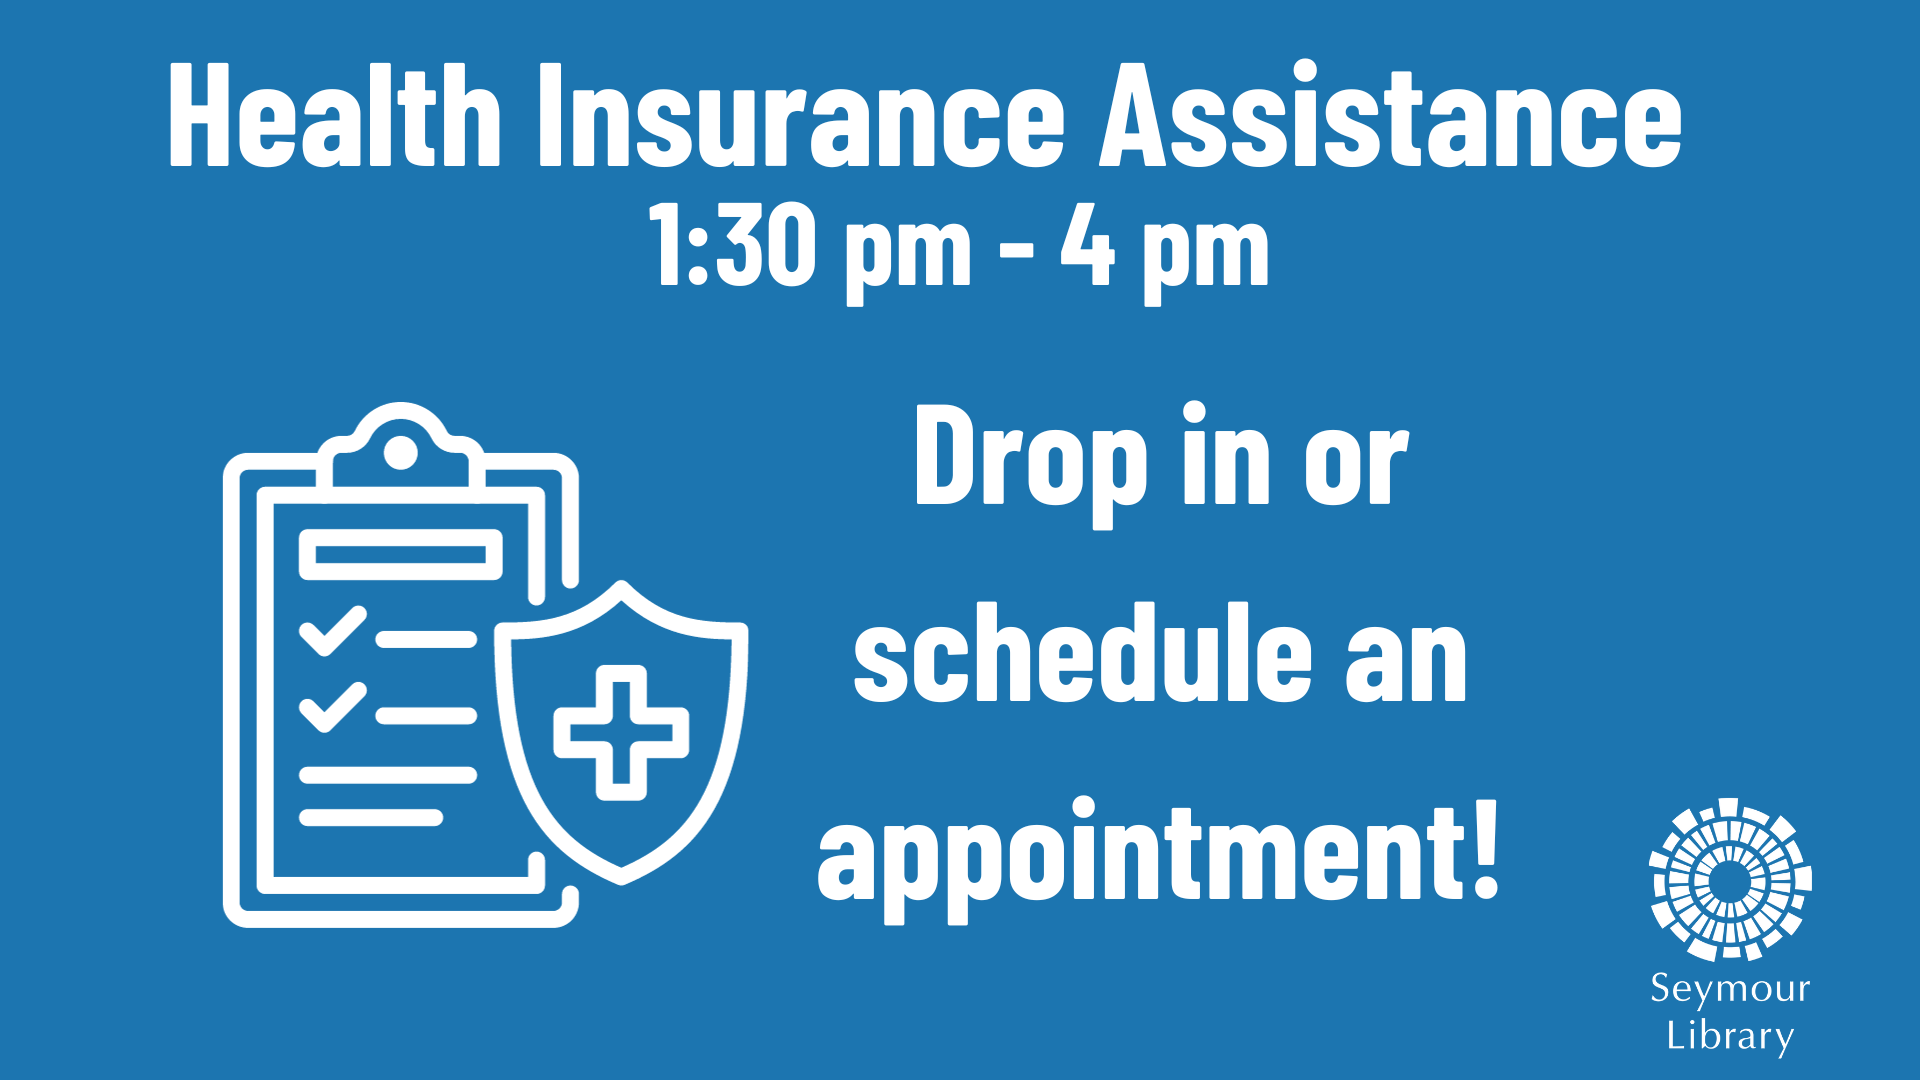 Health Insurance Assistance